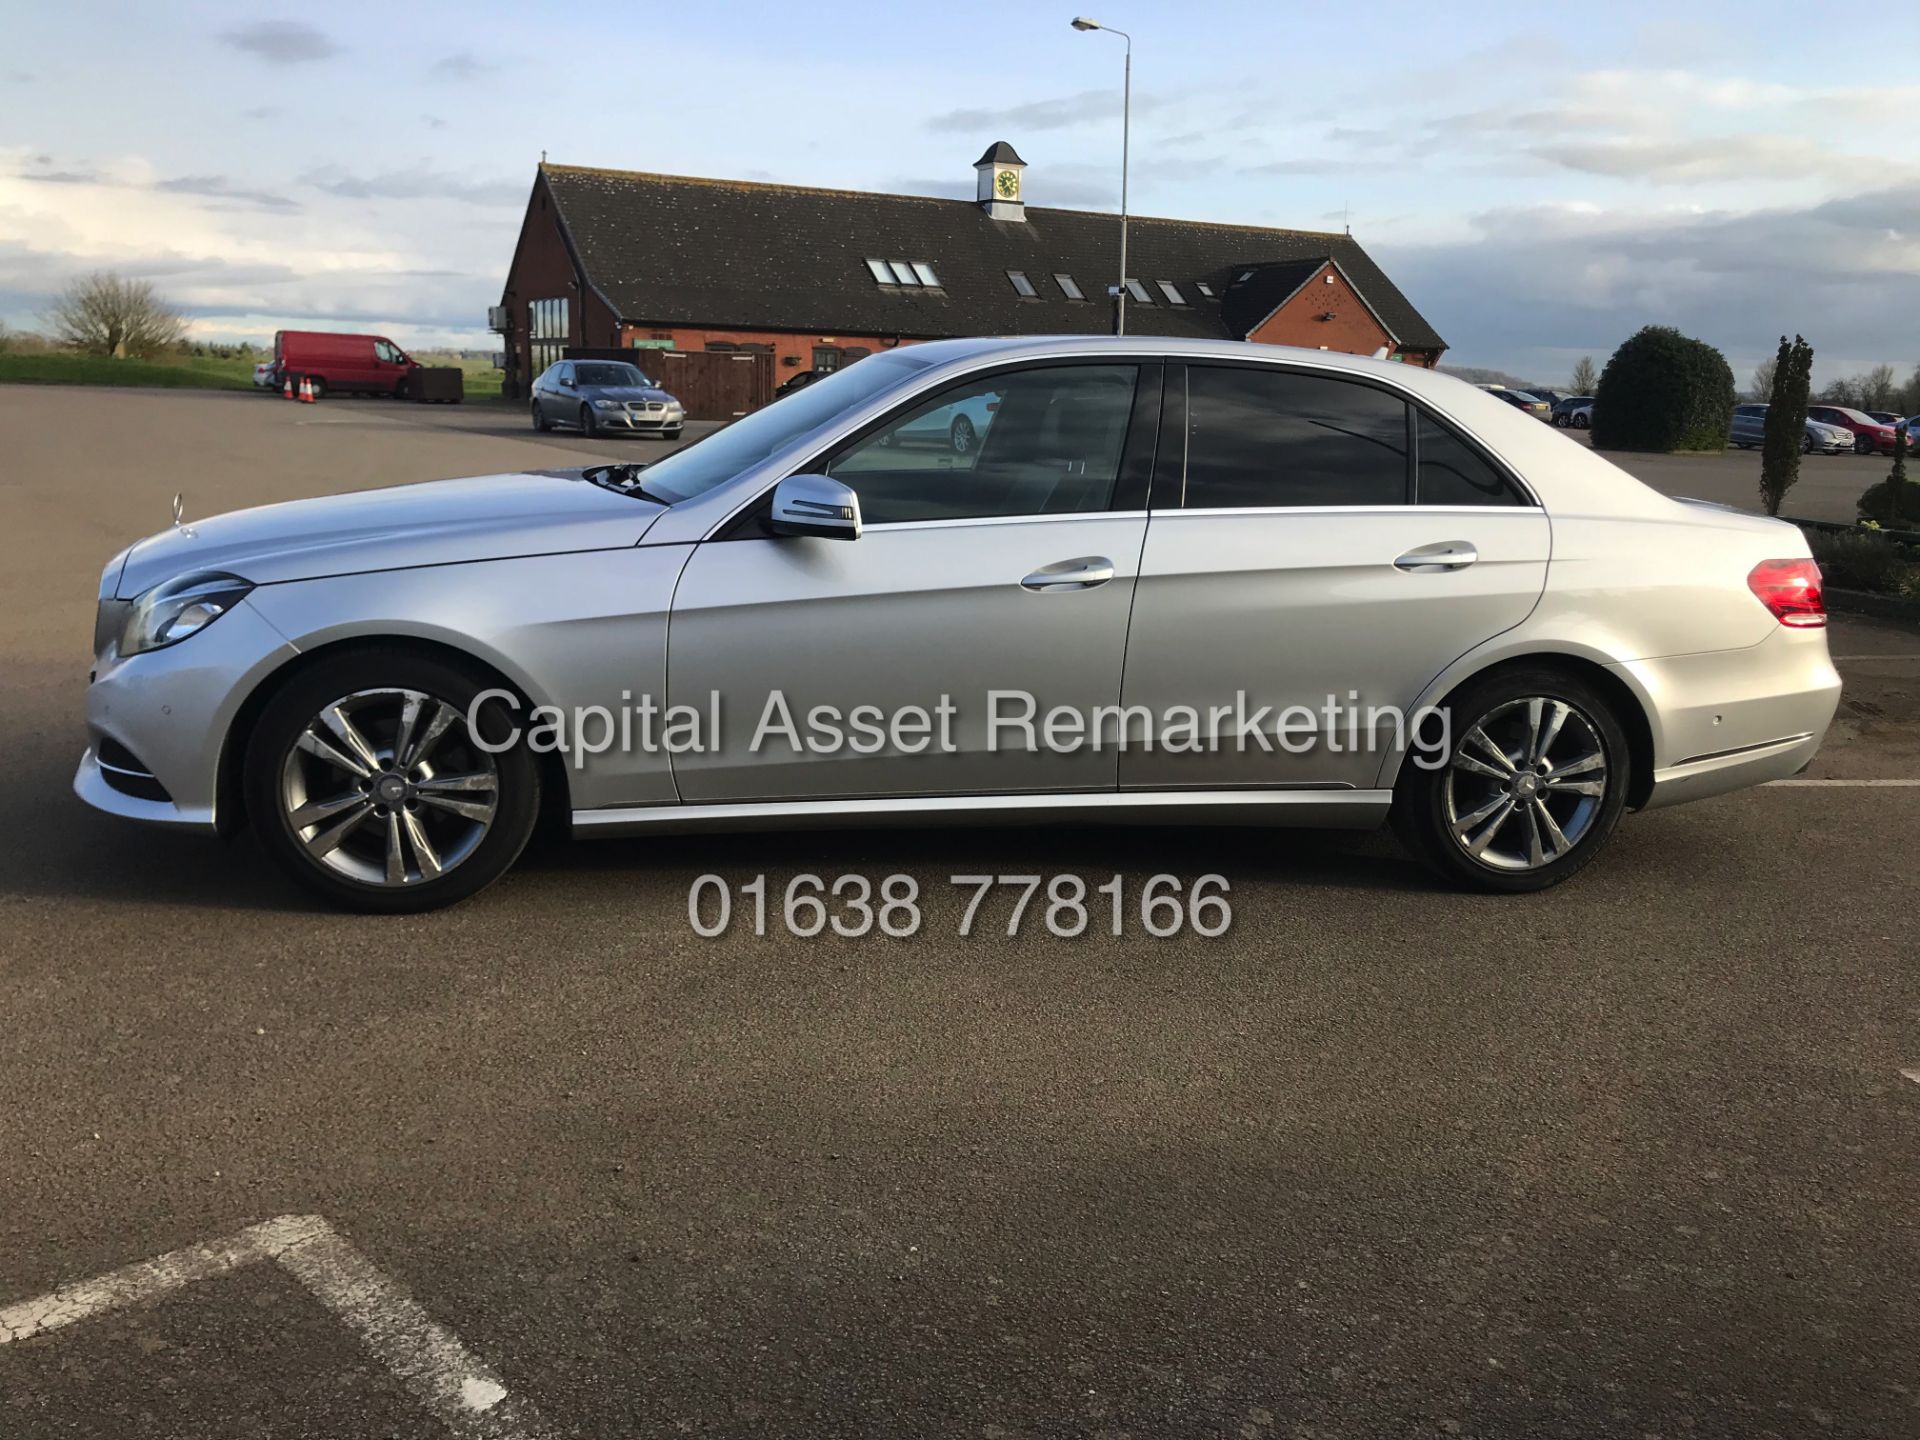 MERCEDES E220d "SPECIAL EQUIPMENT" 7G TRONIC AUTO (2015 MODEL) 1 OWNER - SAT NAV - LEATHER - Image 9 of 26